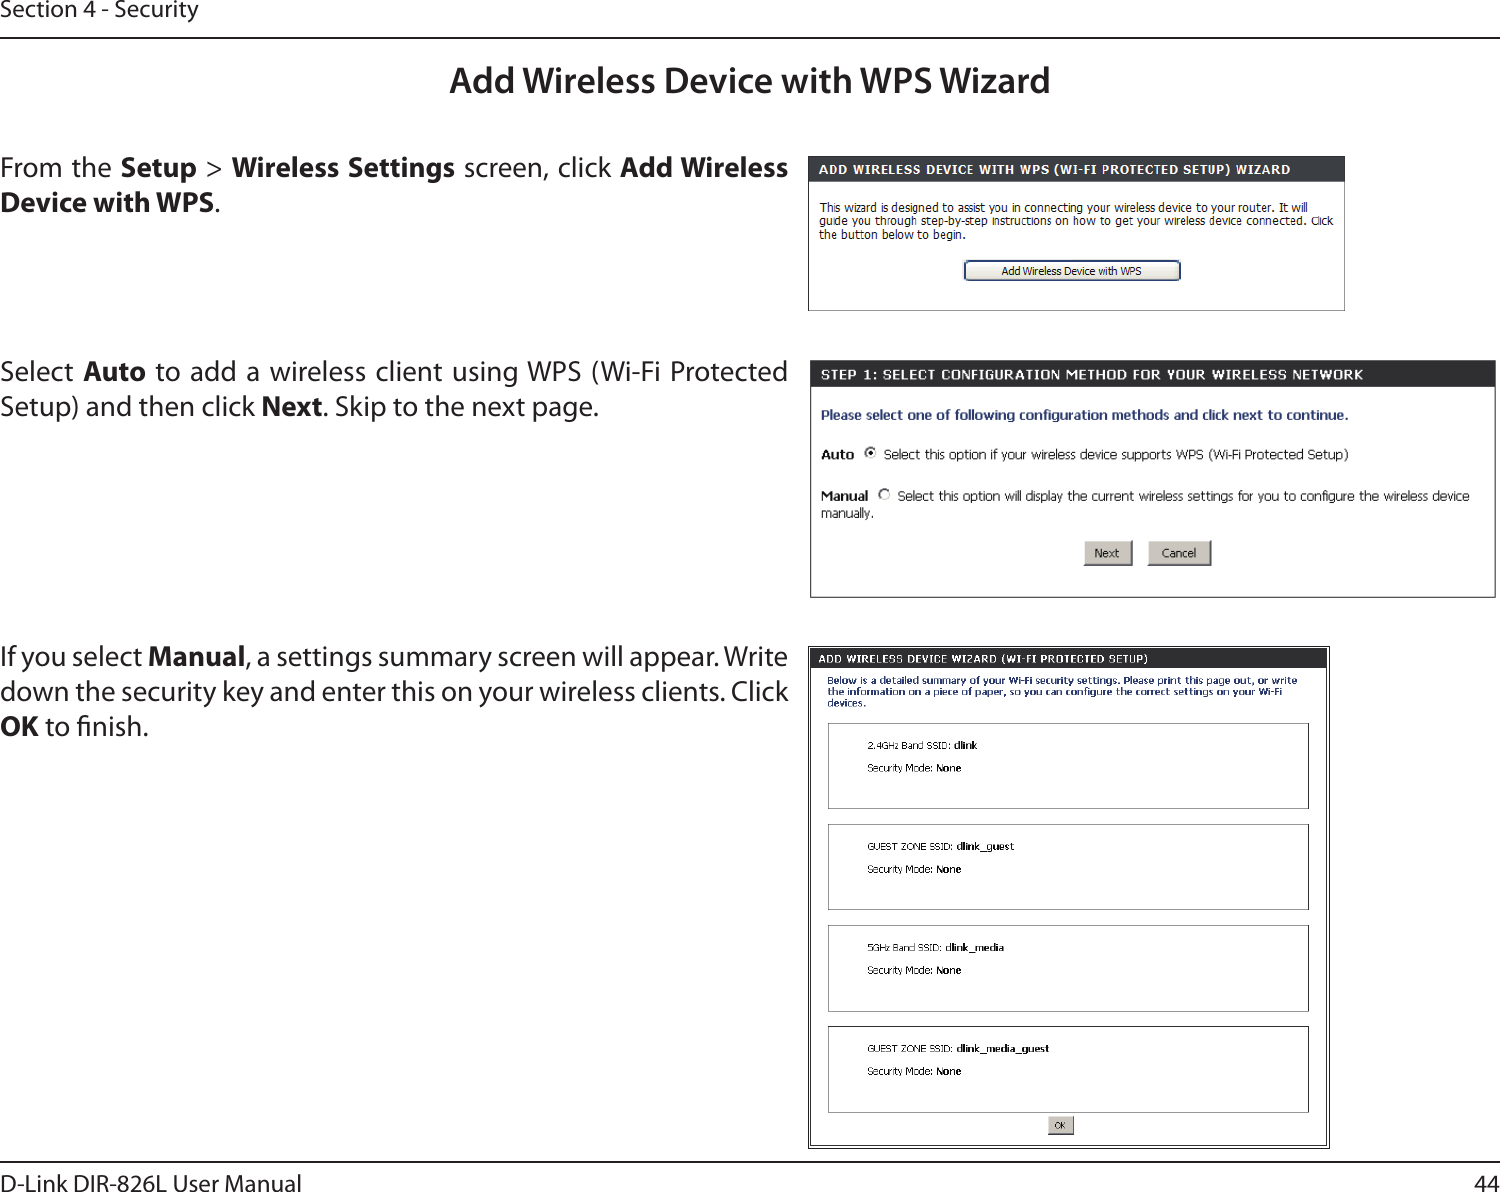 44D-Link DIR-826L User ManualSection 4 - SecurityFrom the Setup &gt; Wireless Settings screen, click Add Wireless Device with WPS.Add Wireless Device with WPS WizardIf you select Manual, a settings summary screen will appear. Write down the security key and enter this on your wireless clients. Click OK to nish.Select Auto to add a  wireless client using WPS (Wi-Fi  Protected Setup) and then click Next. Skip to the next page. 